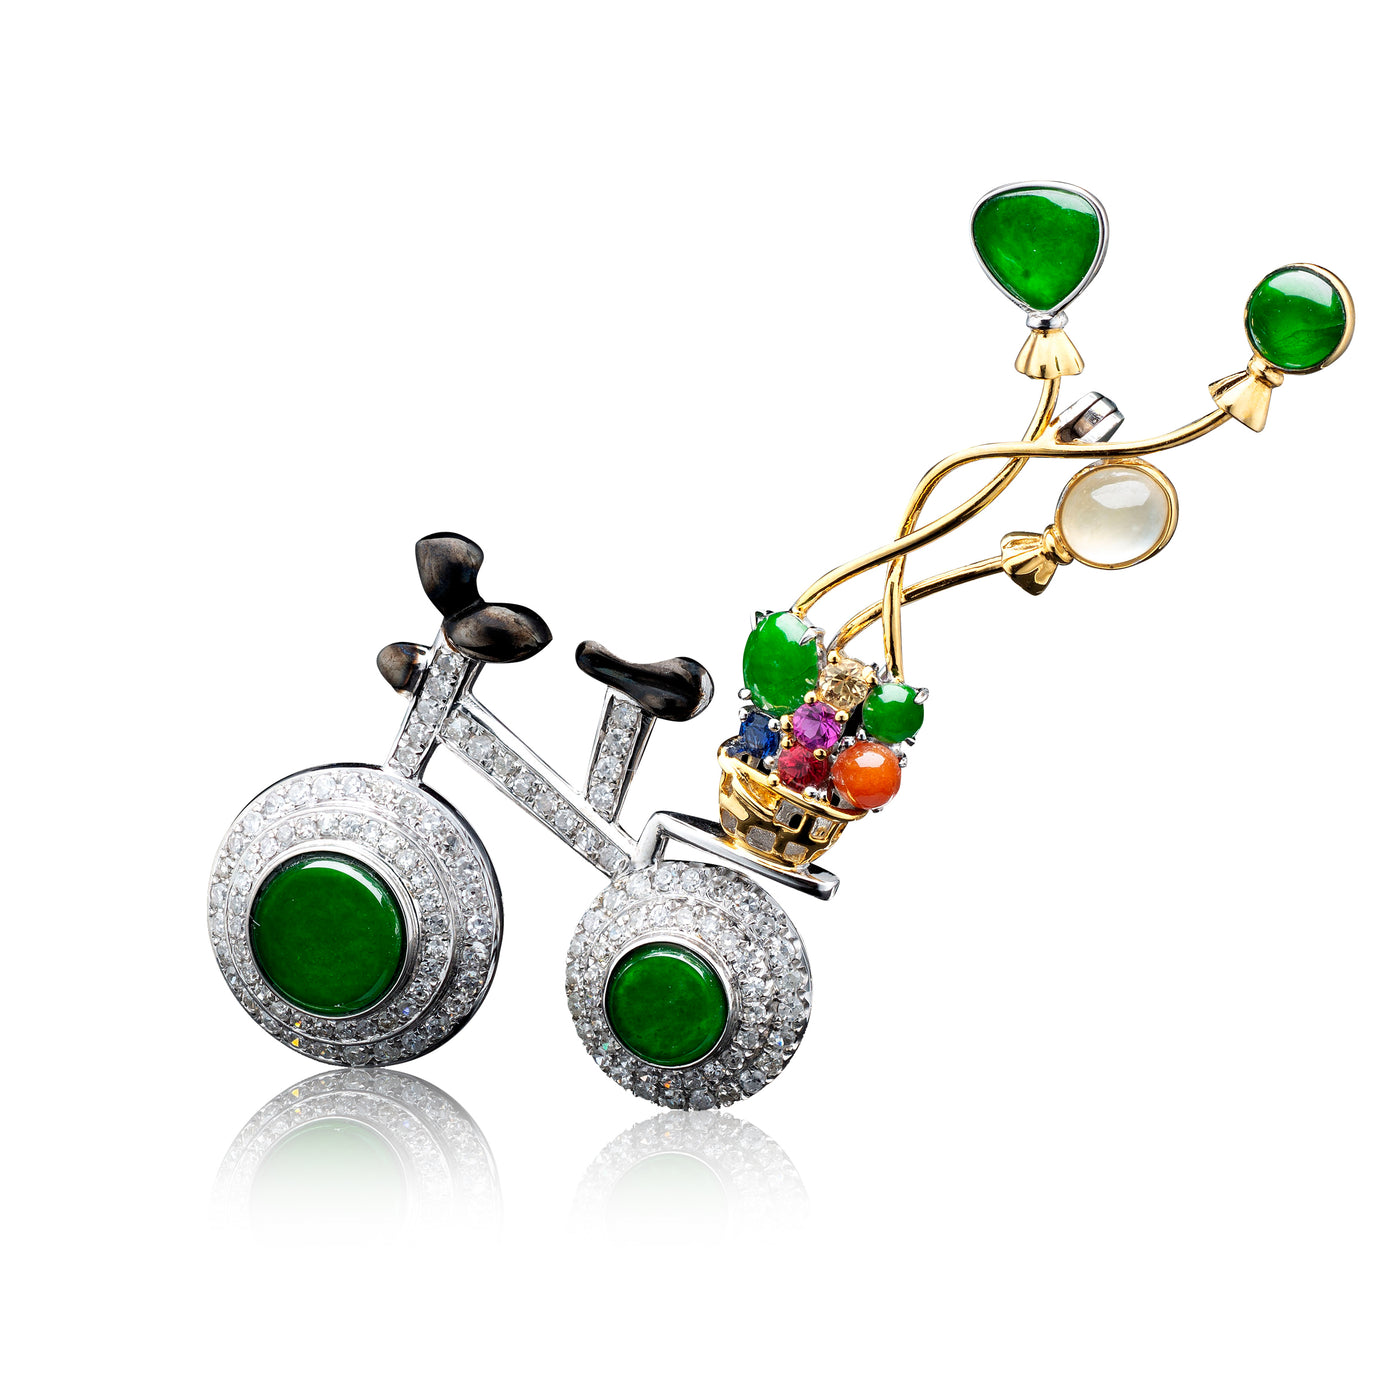 Balloon and Bicycle jadeite brooch with diamond and Garnet